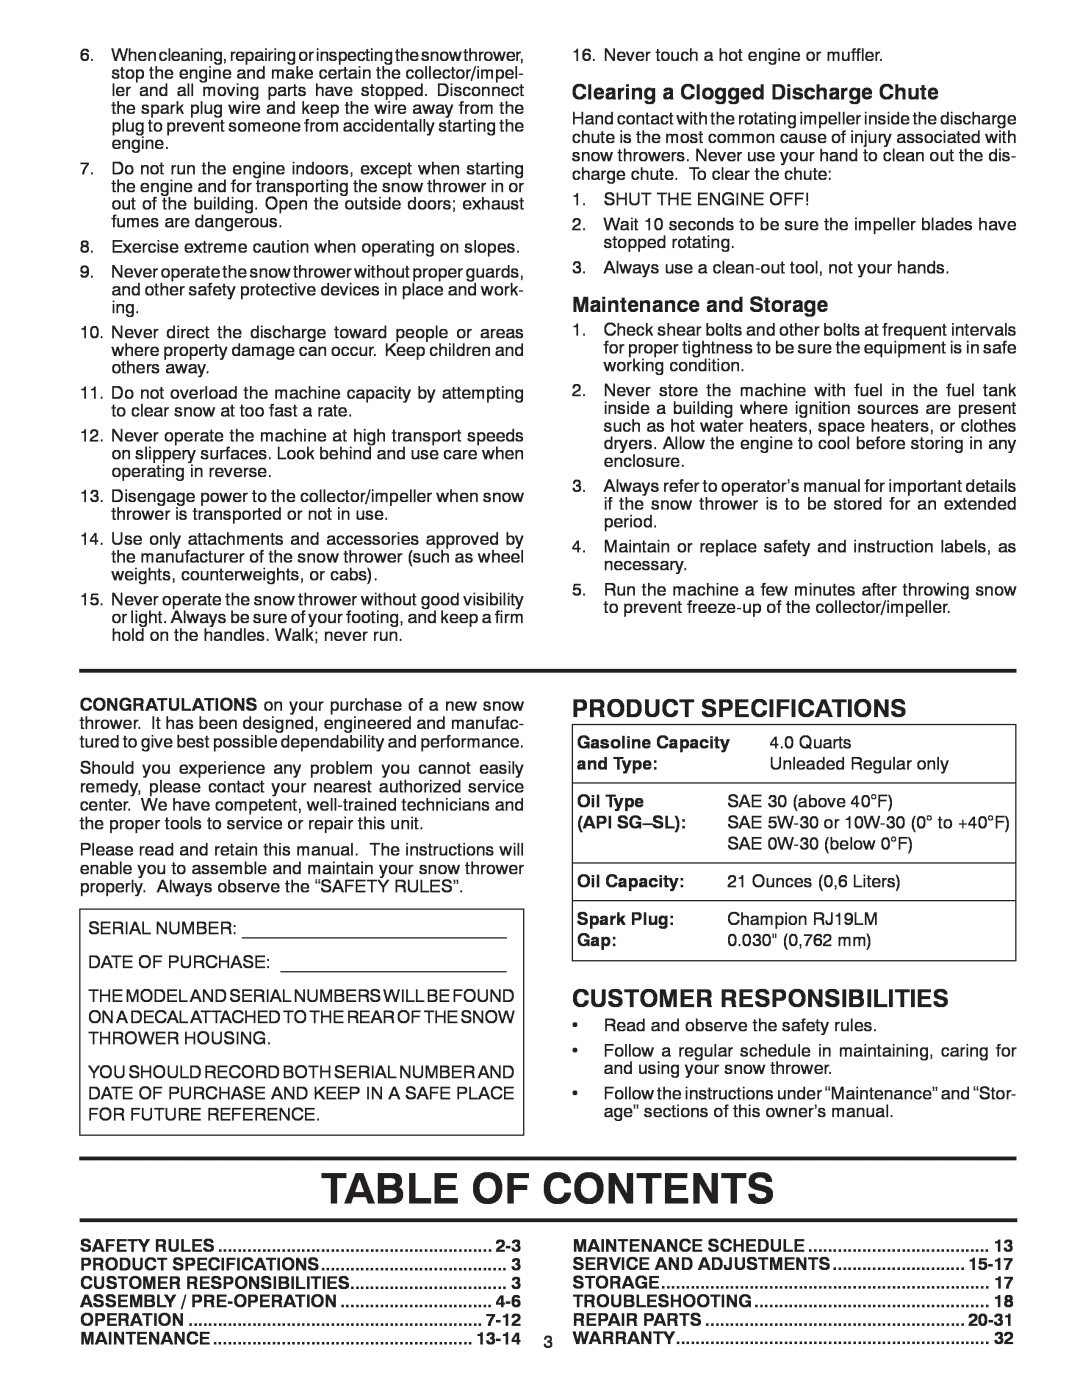 Poulan 414659 Table Of Contents, Product Specifications, Customer Responsibilities, Clearing a Clogged Discharge Chute 